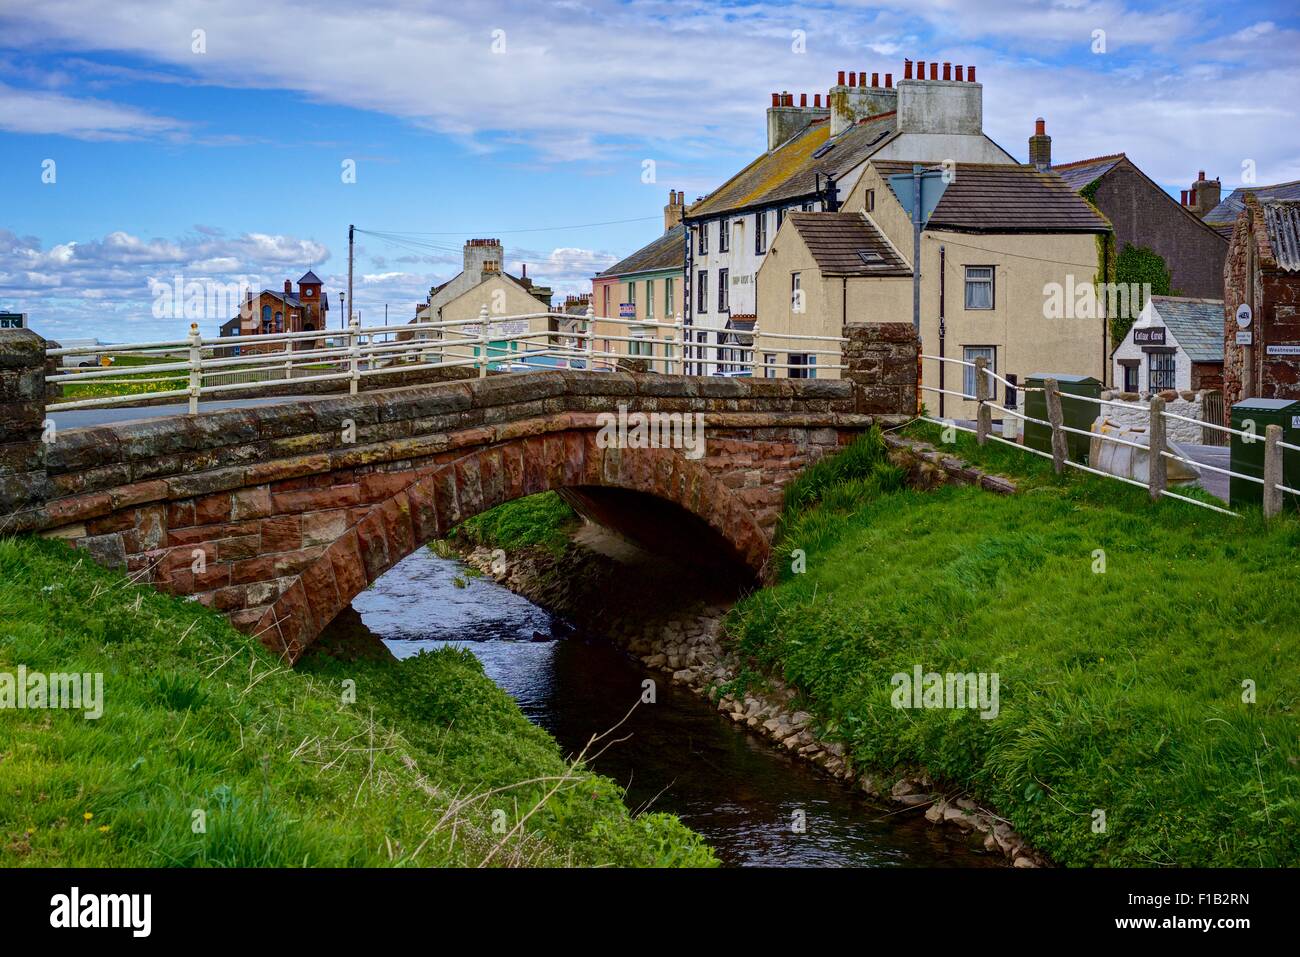 A red stone bridge across the River Ellen in Alonby, Cumbria, England., with assorted painted houses, blue sky, green grass. Stock Photo